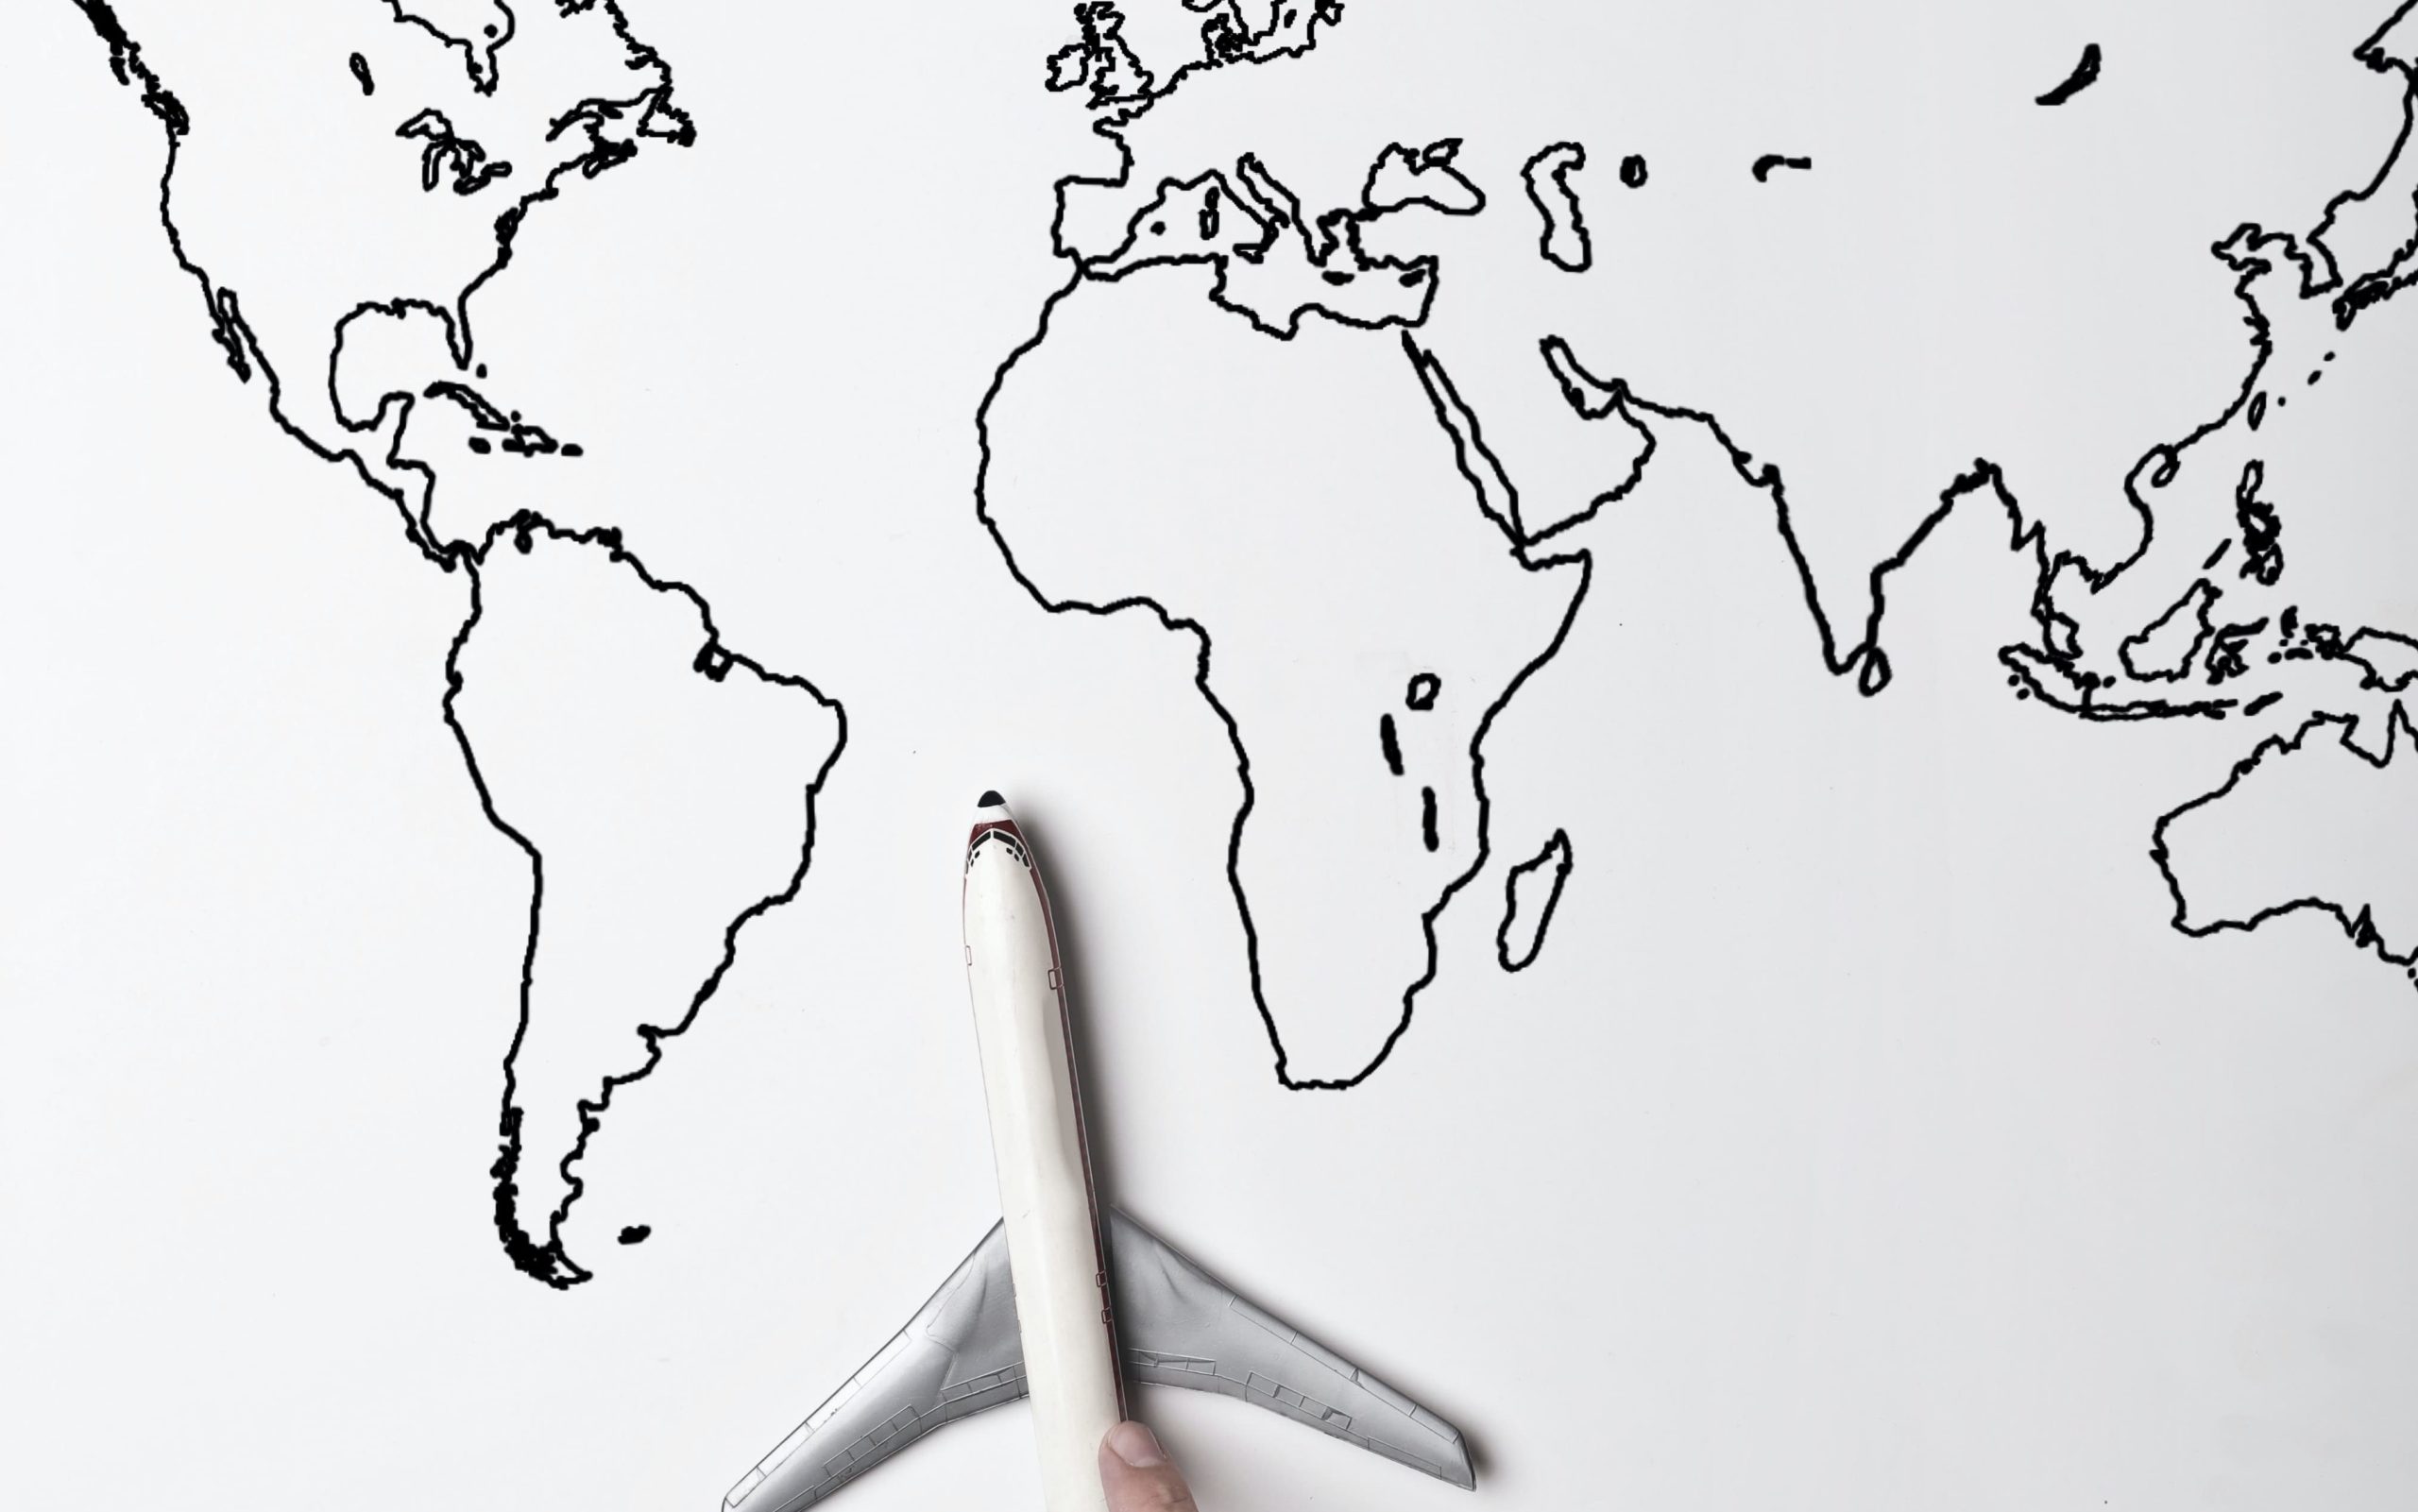 The importance of translation in the internationalization of companies